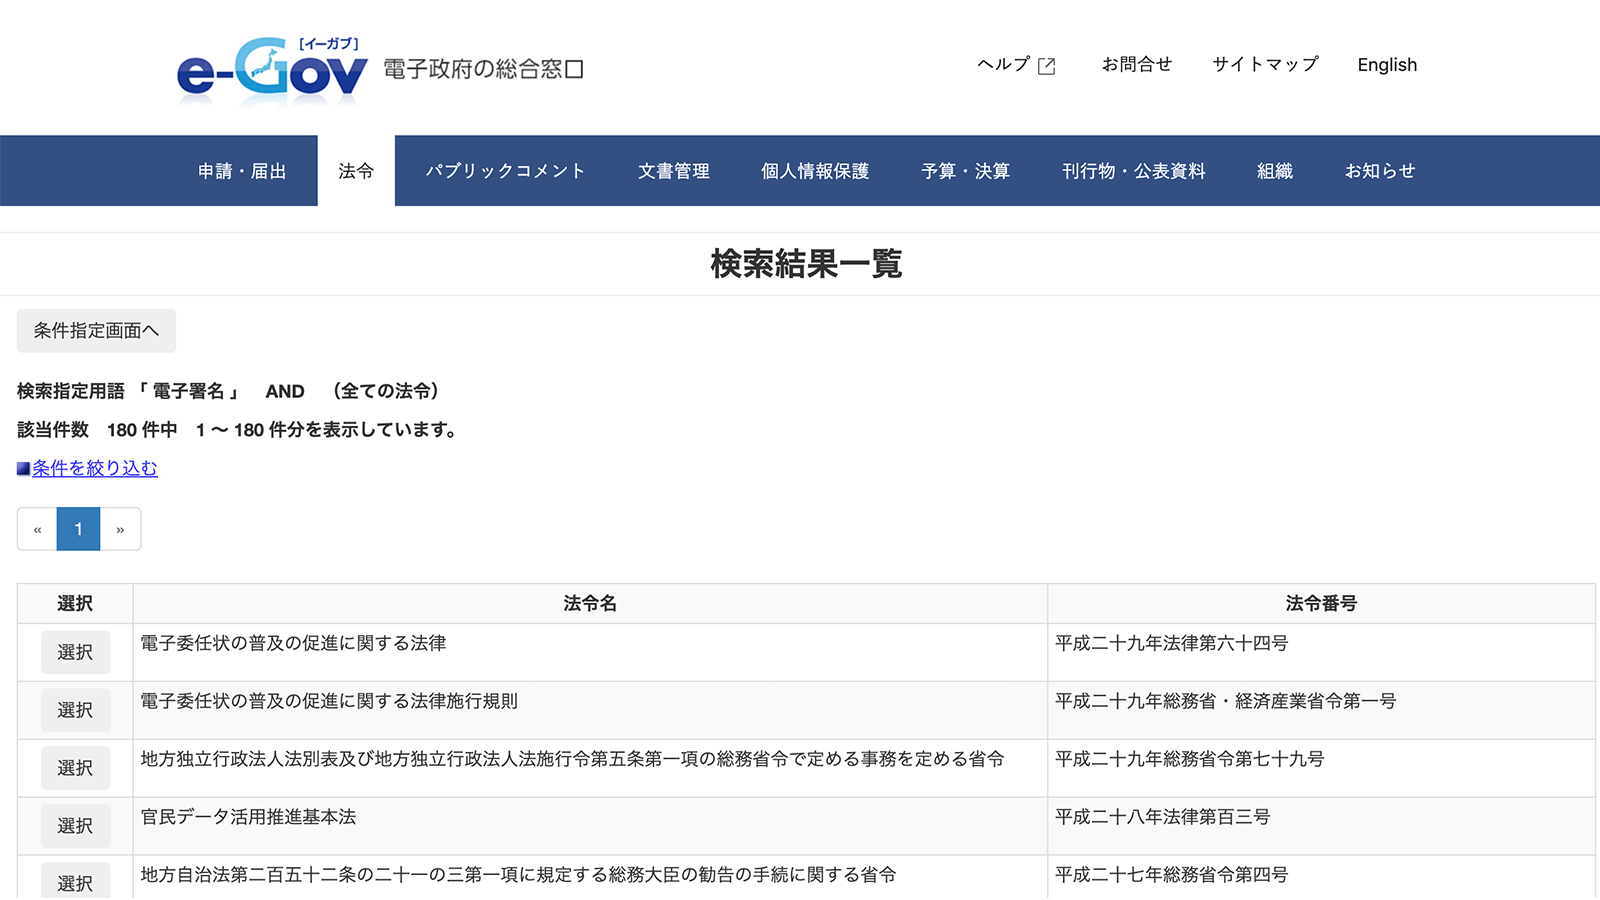 https://elaws.e-gov.go.jp/search/elawsSearch/elaws_search/lsg0100/search により「電子署名」が使われる法令を抽出